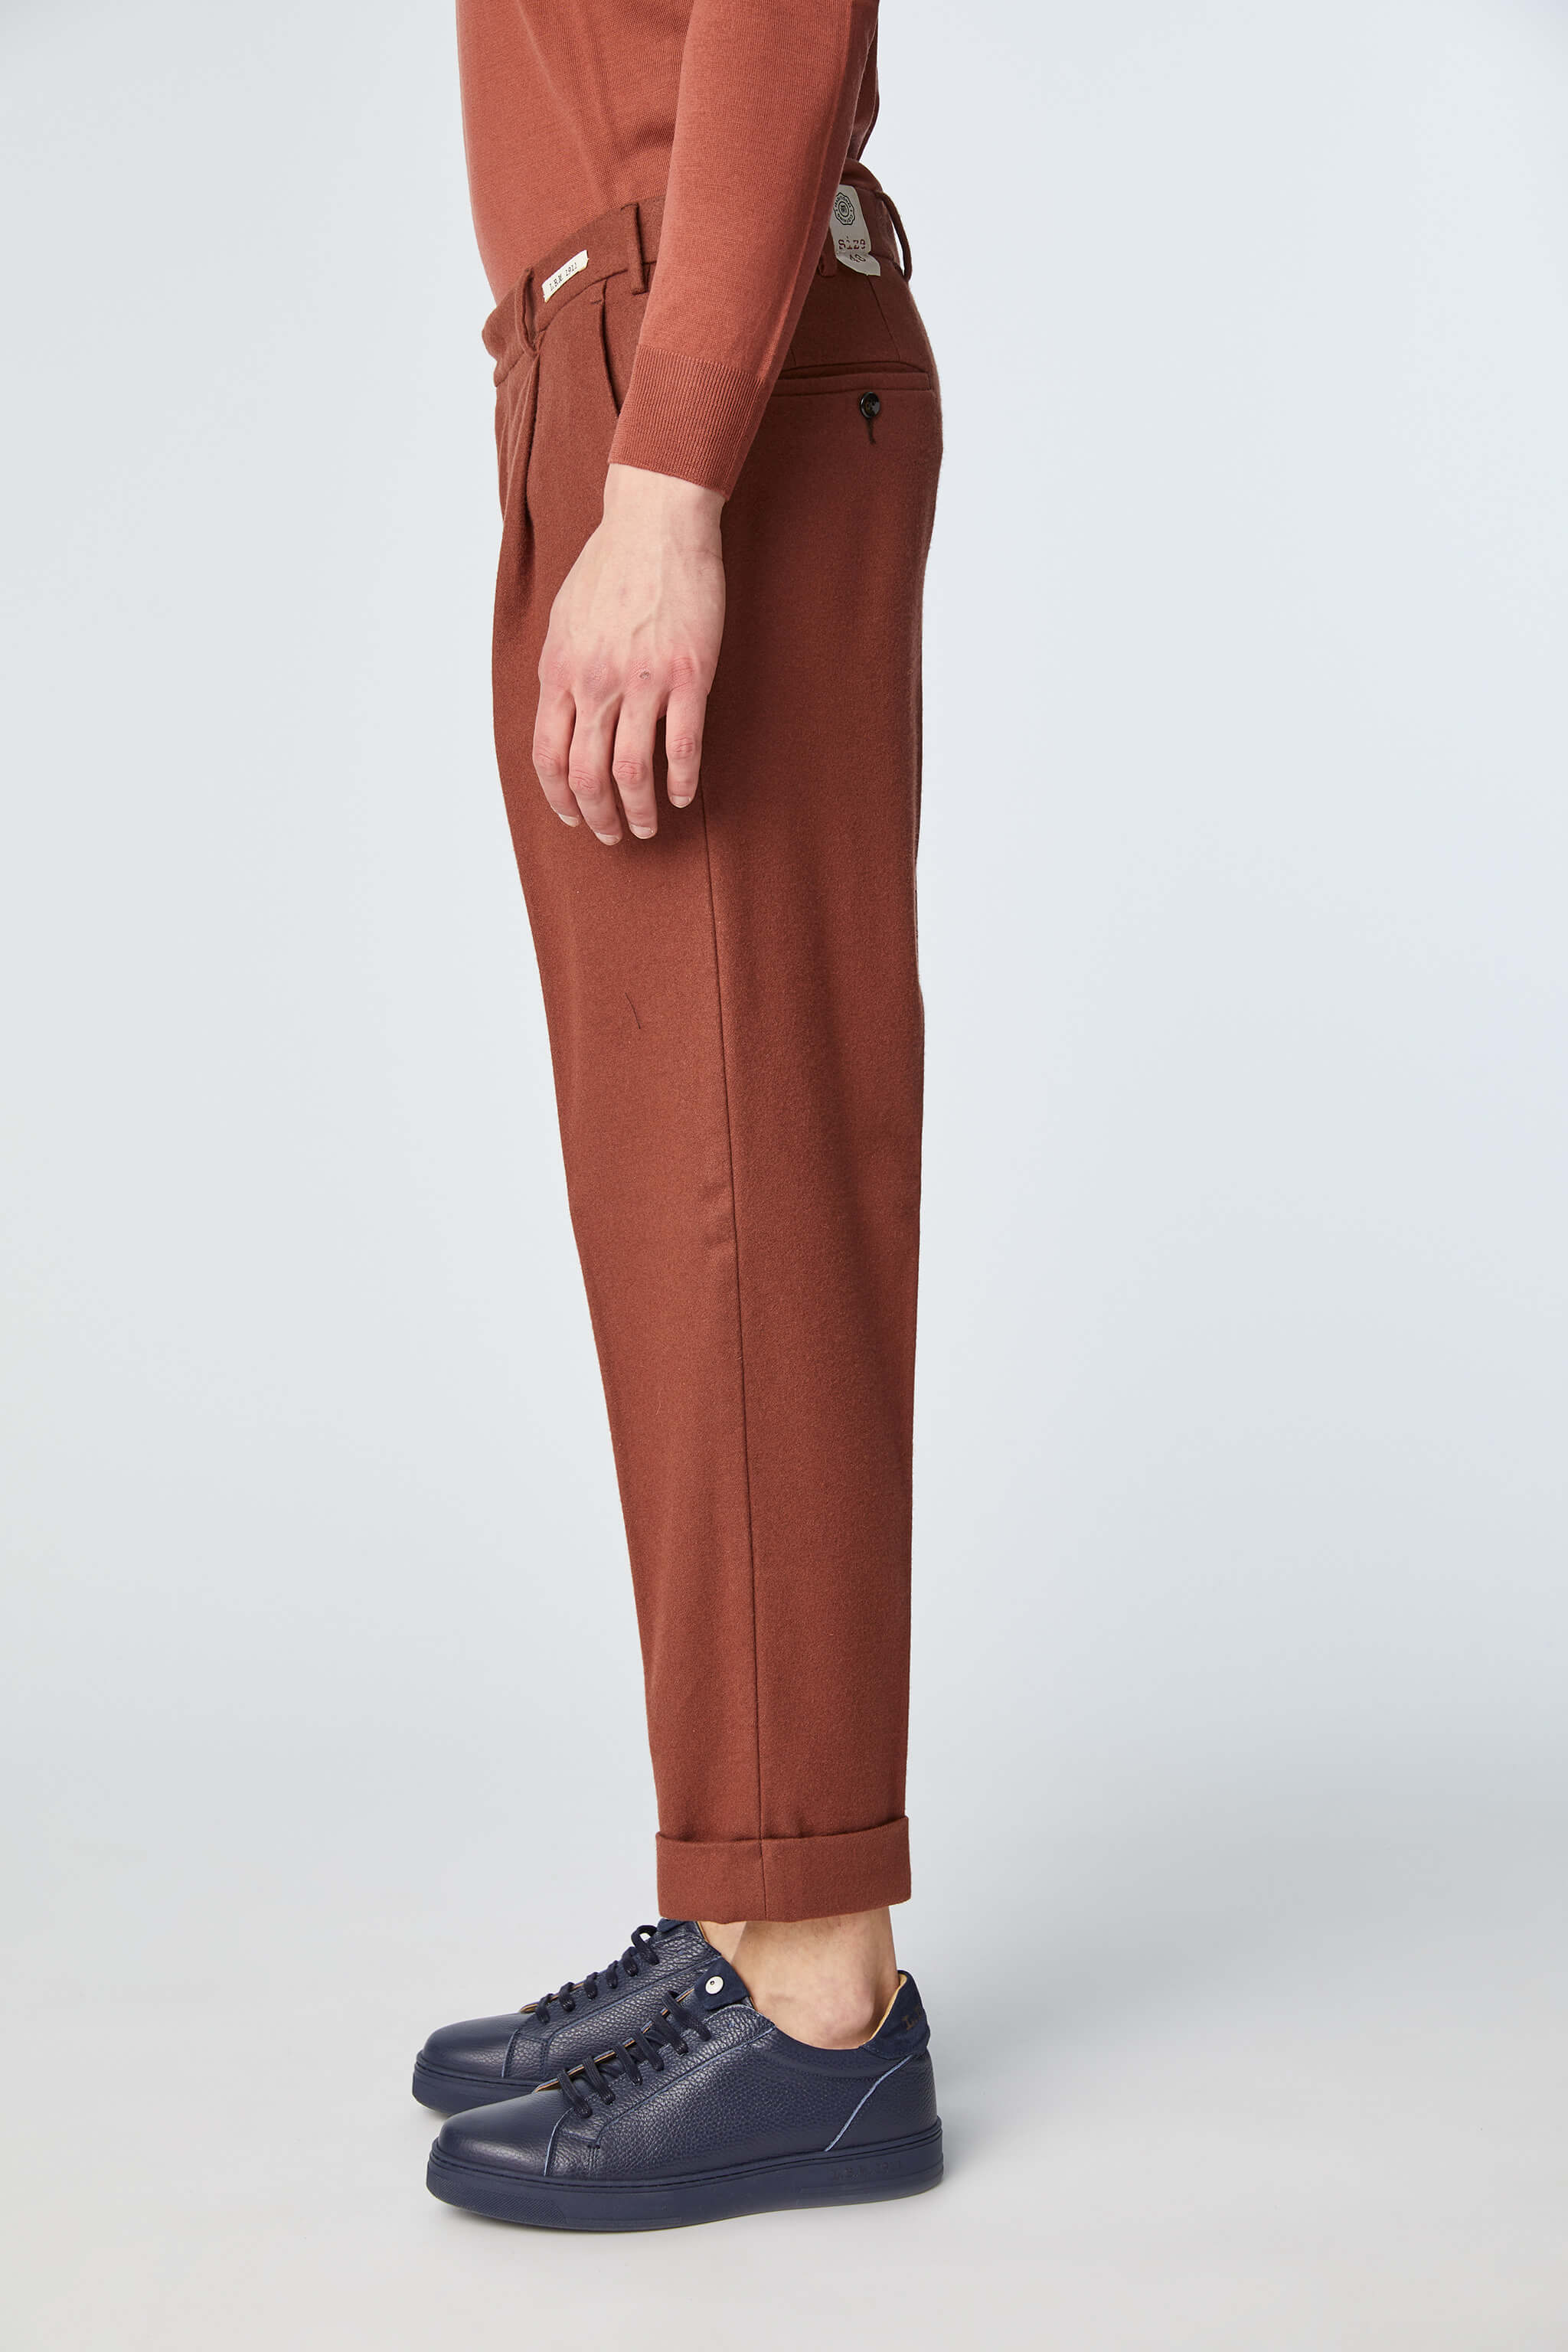 Garment-dyed MILES pants in brown